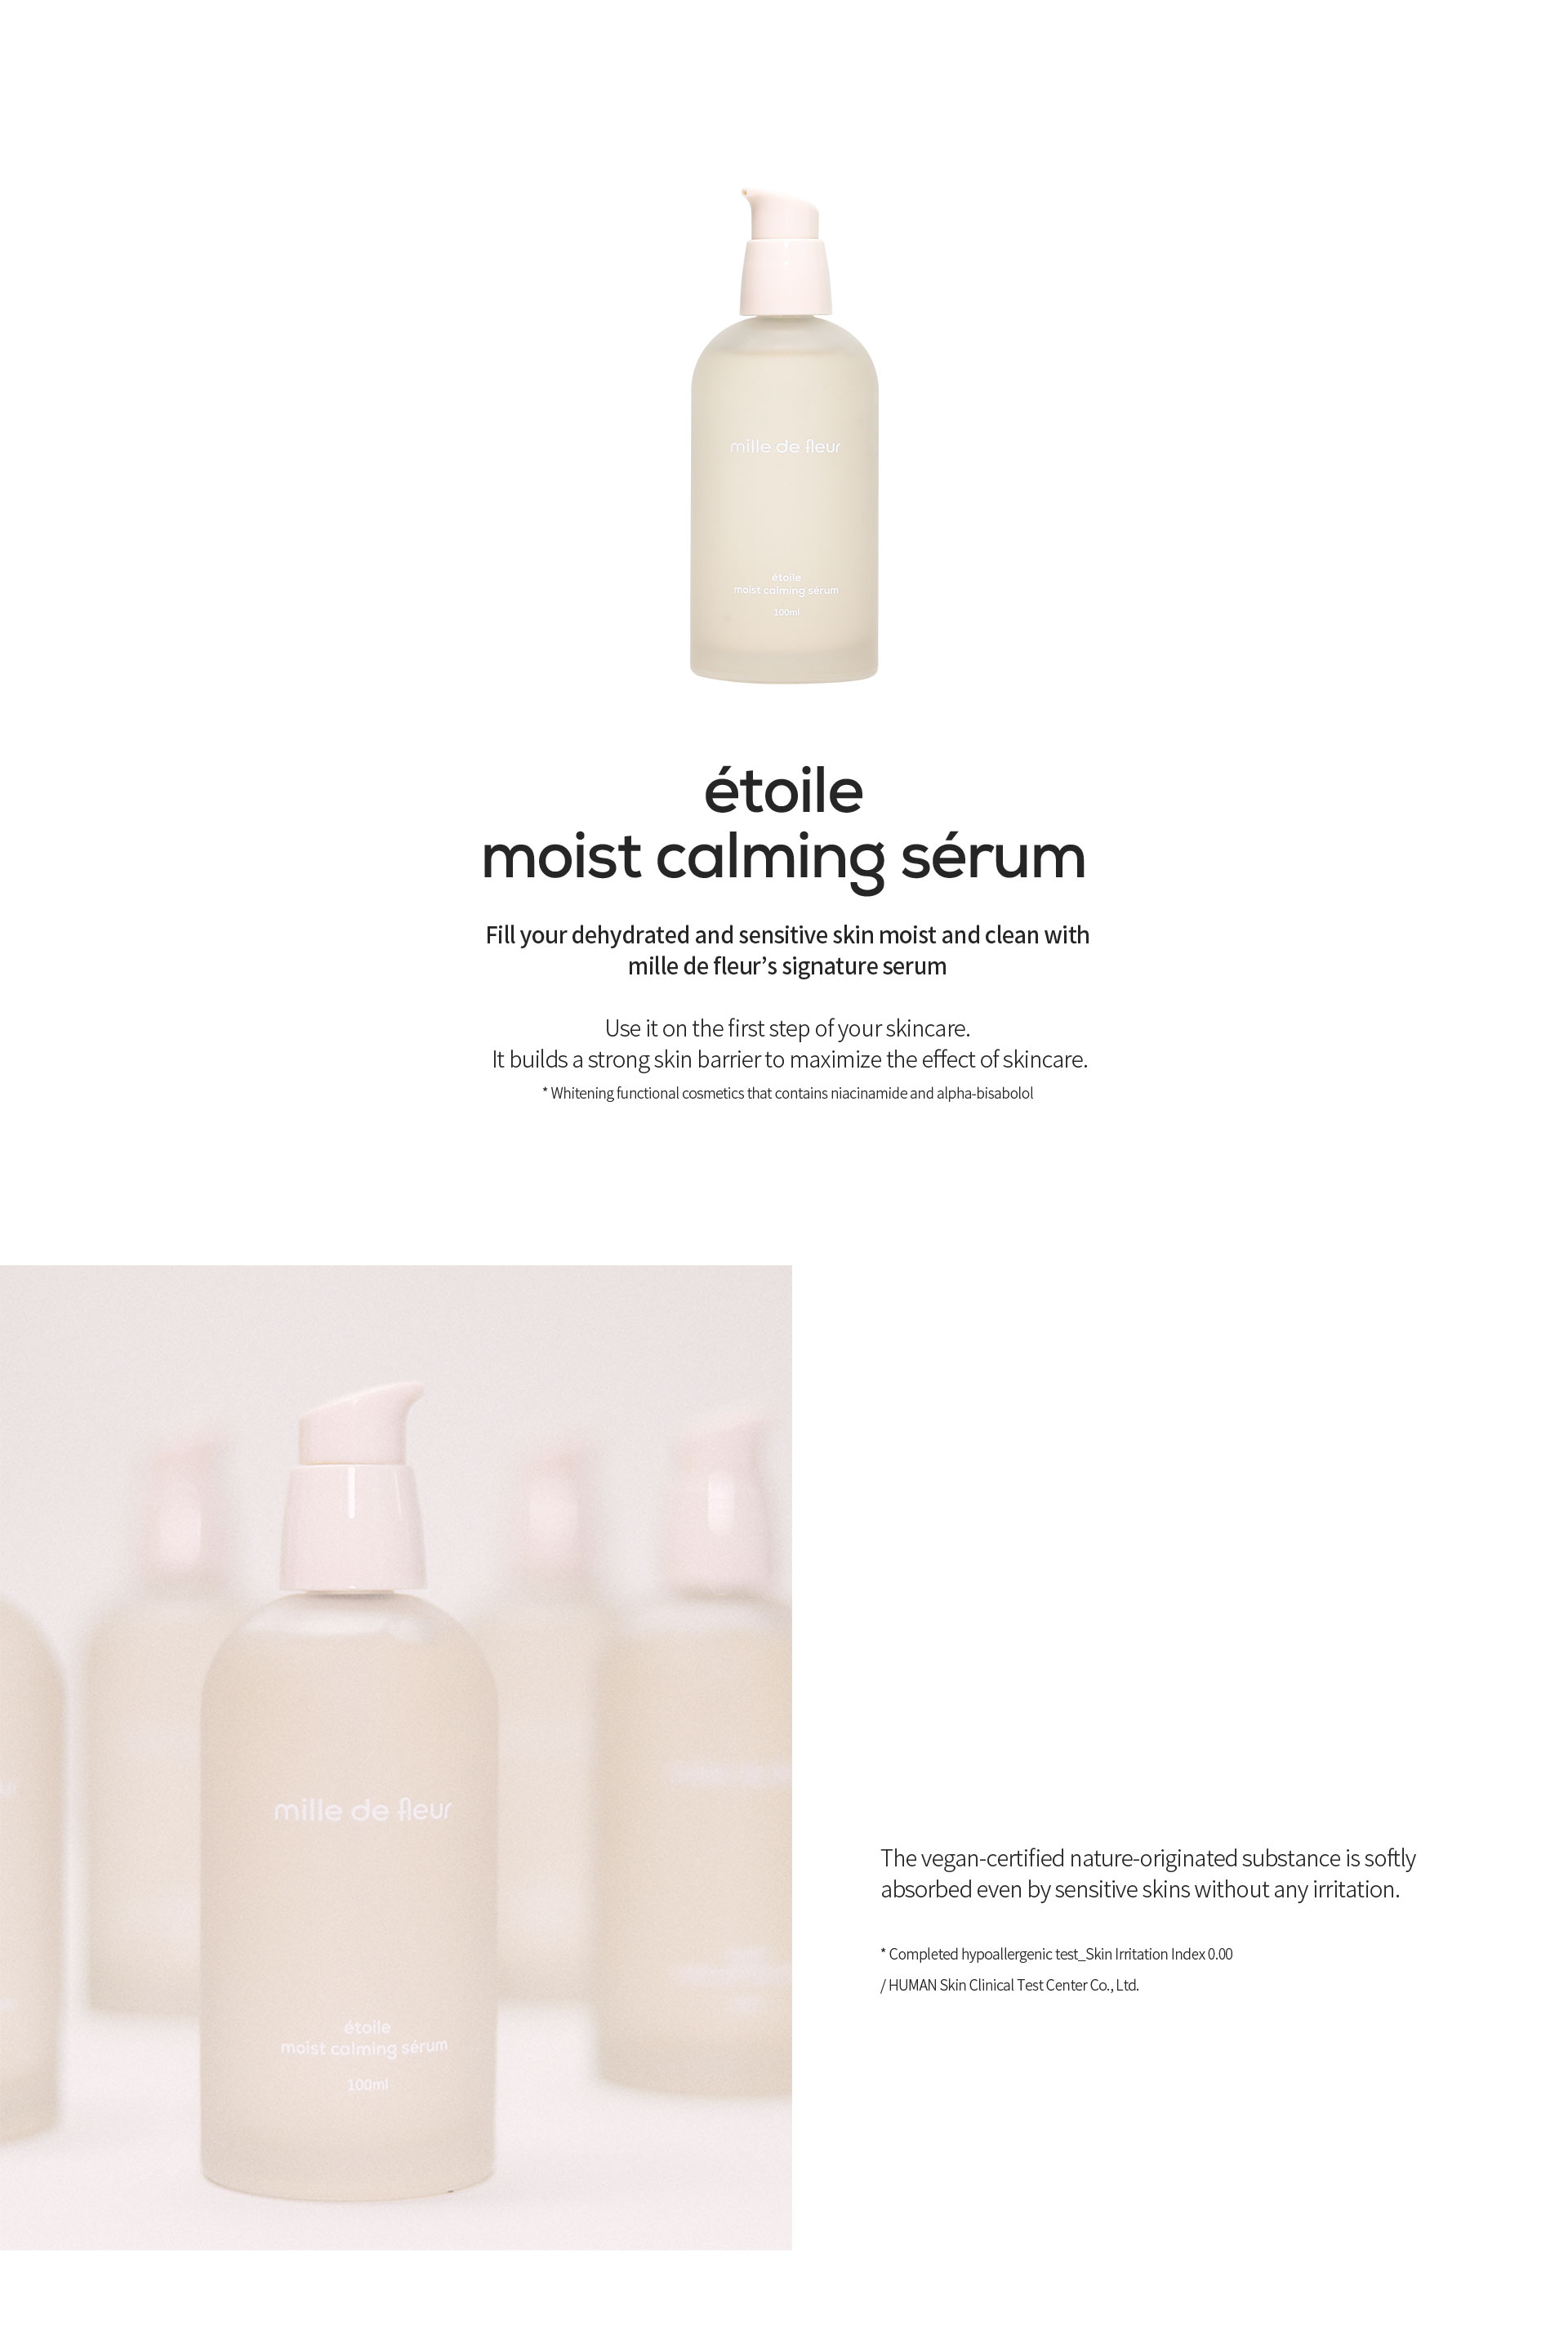 étoile moist calming sérum, Fill your dehydrated and sensitive skin moist and clean with mille de fleur’s signature serum, Use it on the first step of your skincare. It builds a strong skin barrier to maximize the effect of skincare. * Whitening functional cosmetics that contains niacinamide and alpha-bisabolol, The vegan-certified nature-originated substance is softly
            absorbed even by sensitive skins without any irritation. * Completed hypoallergenic test_Skin Irritation Index 0.00 / HUMAN Skin Clinical Test Center Co., Ltd.